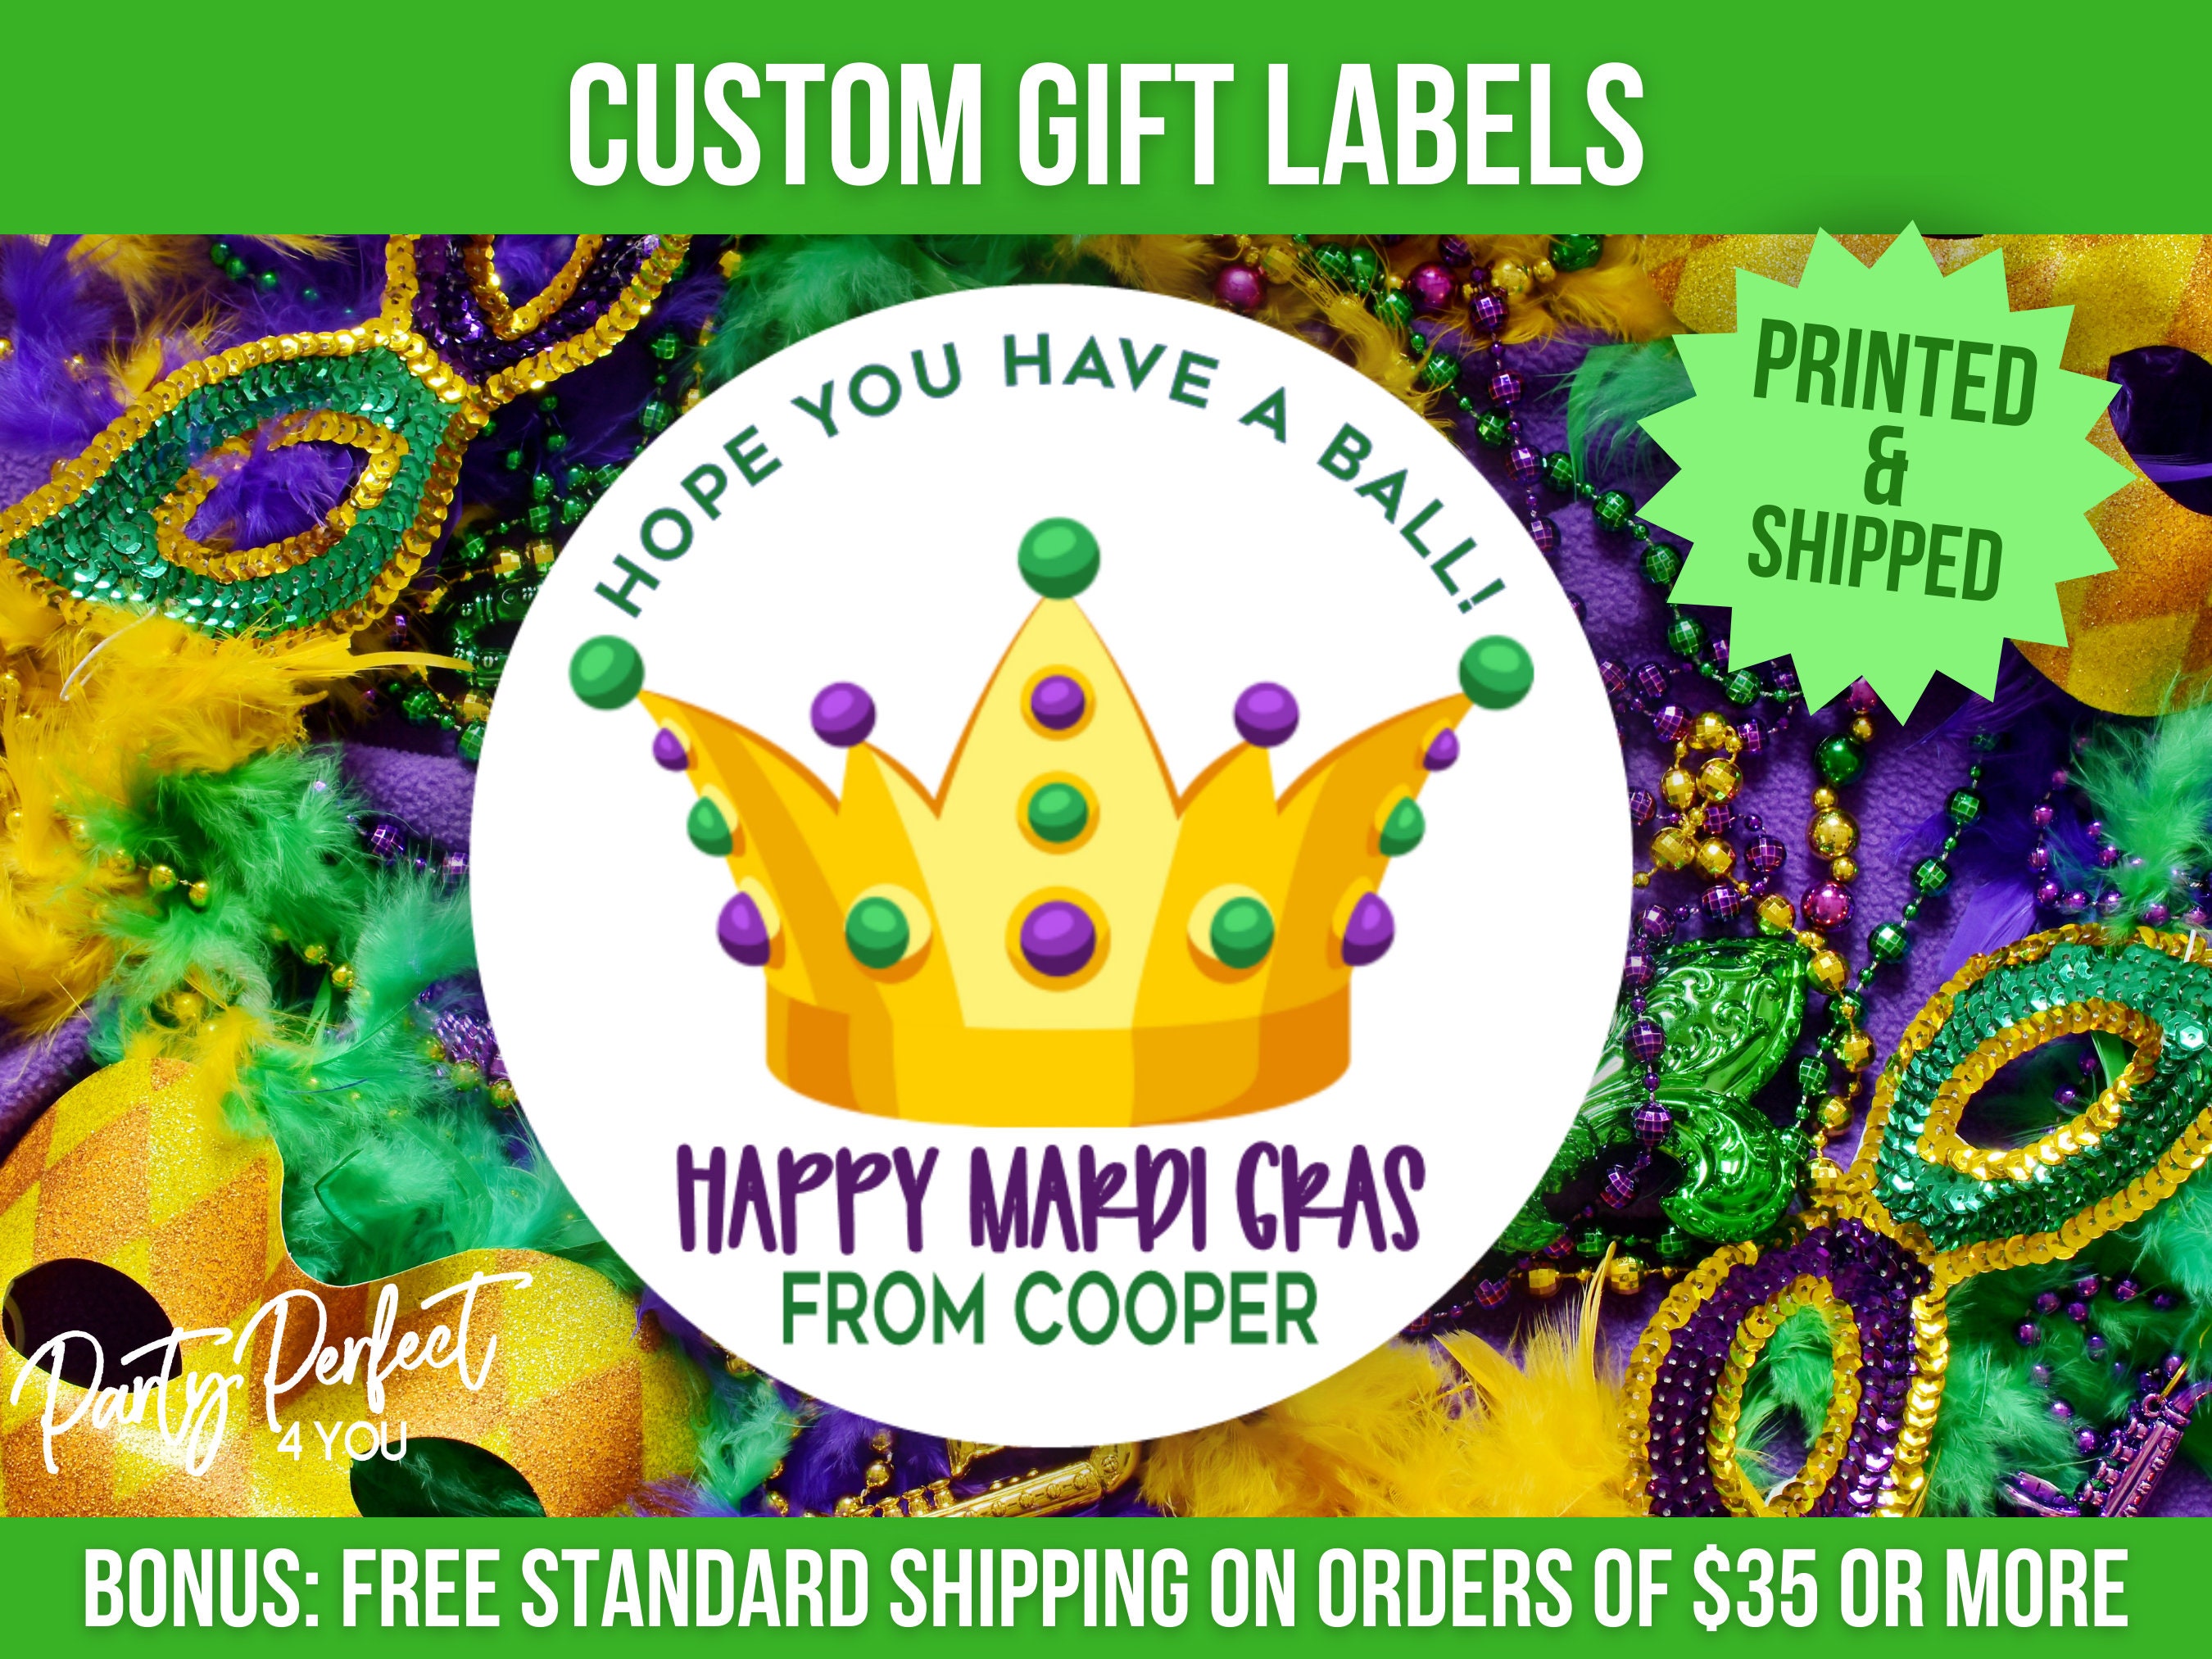 Mardi Gras Stickers, Set of 48 Purple Green and Gold French Fleur De Lis  Glitter Stickers, Louisiana Flower Symbol, Fat Tuesday Stickers. 